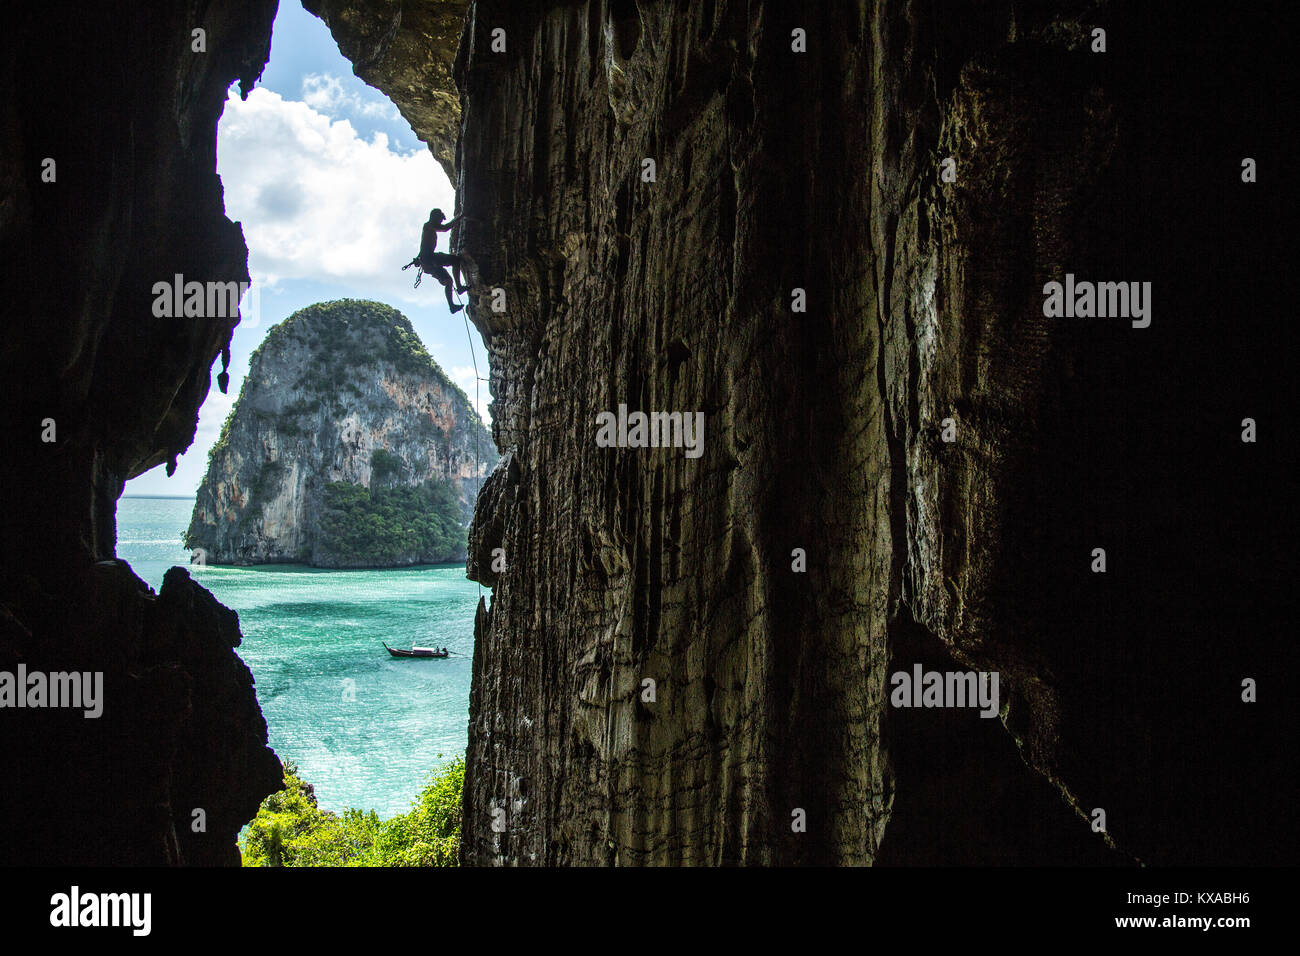 Side view silhouette of man rock climbing in beautiful natural scenery on edge of cave, Phra Nang Beach, Krabi, Thailand Stock Photo